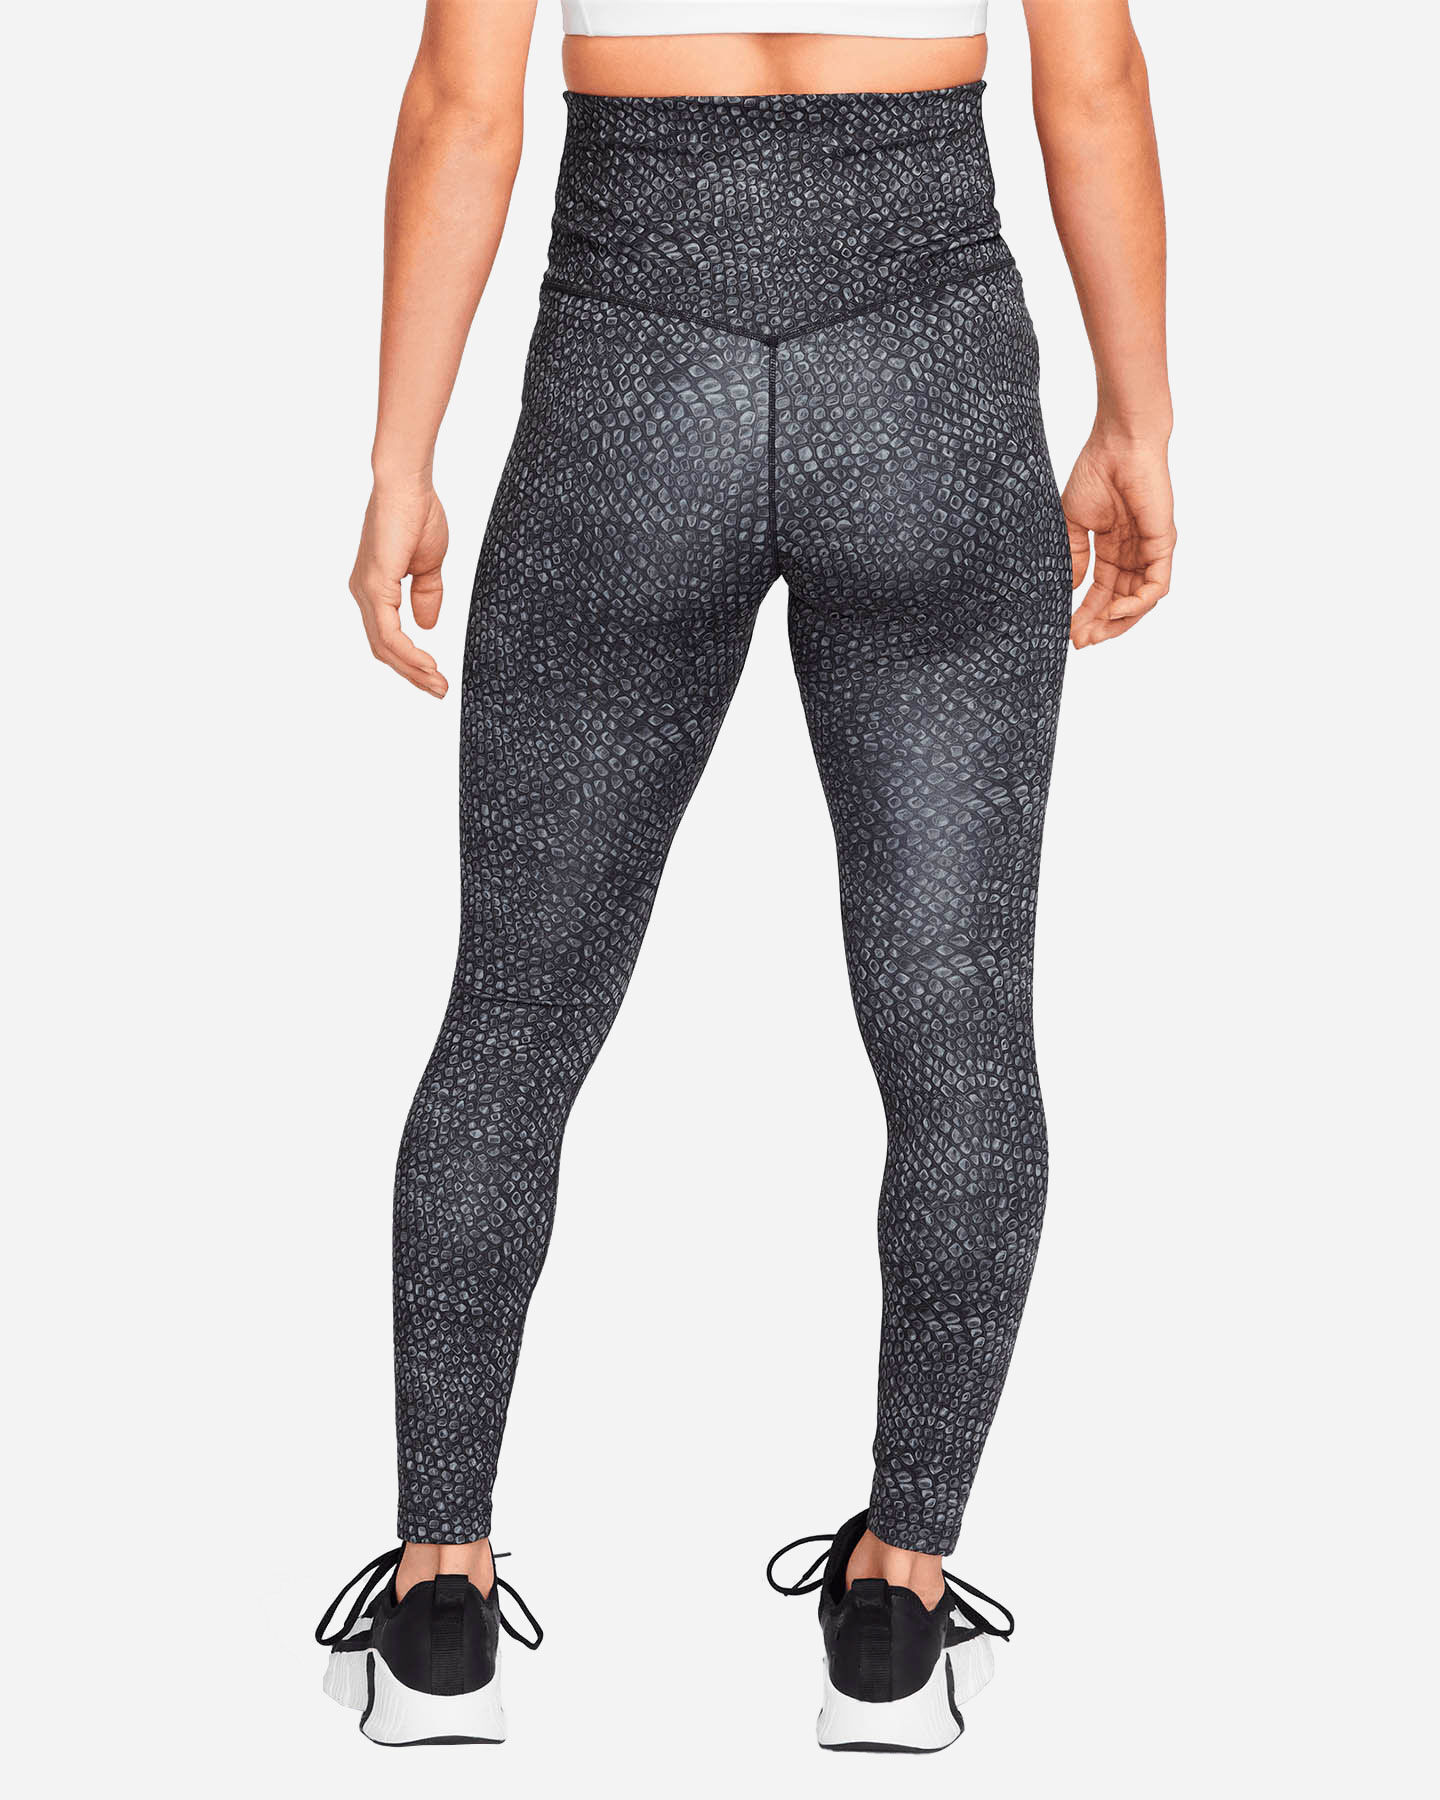  Leggings NIKE ALL OVER PRINTED 7/8 W S5563222|010|L scatto 1